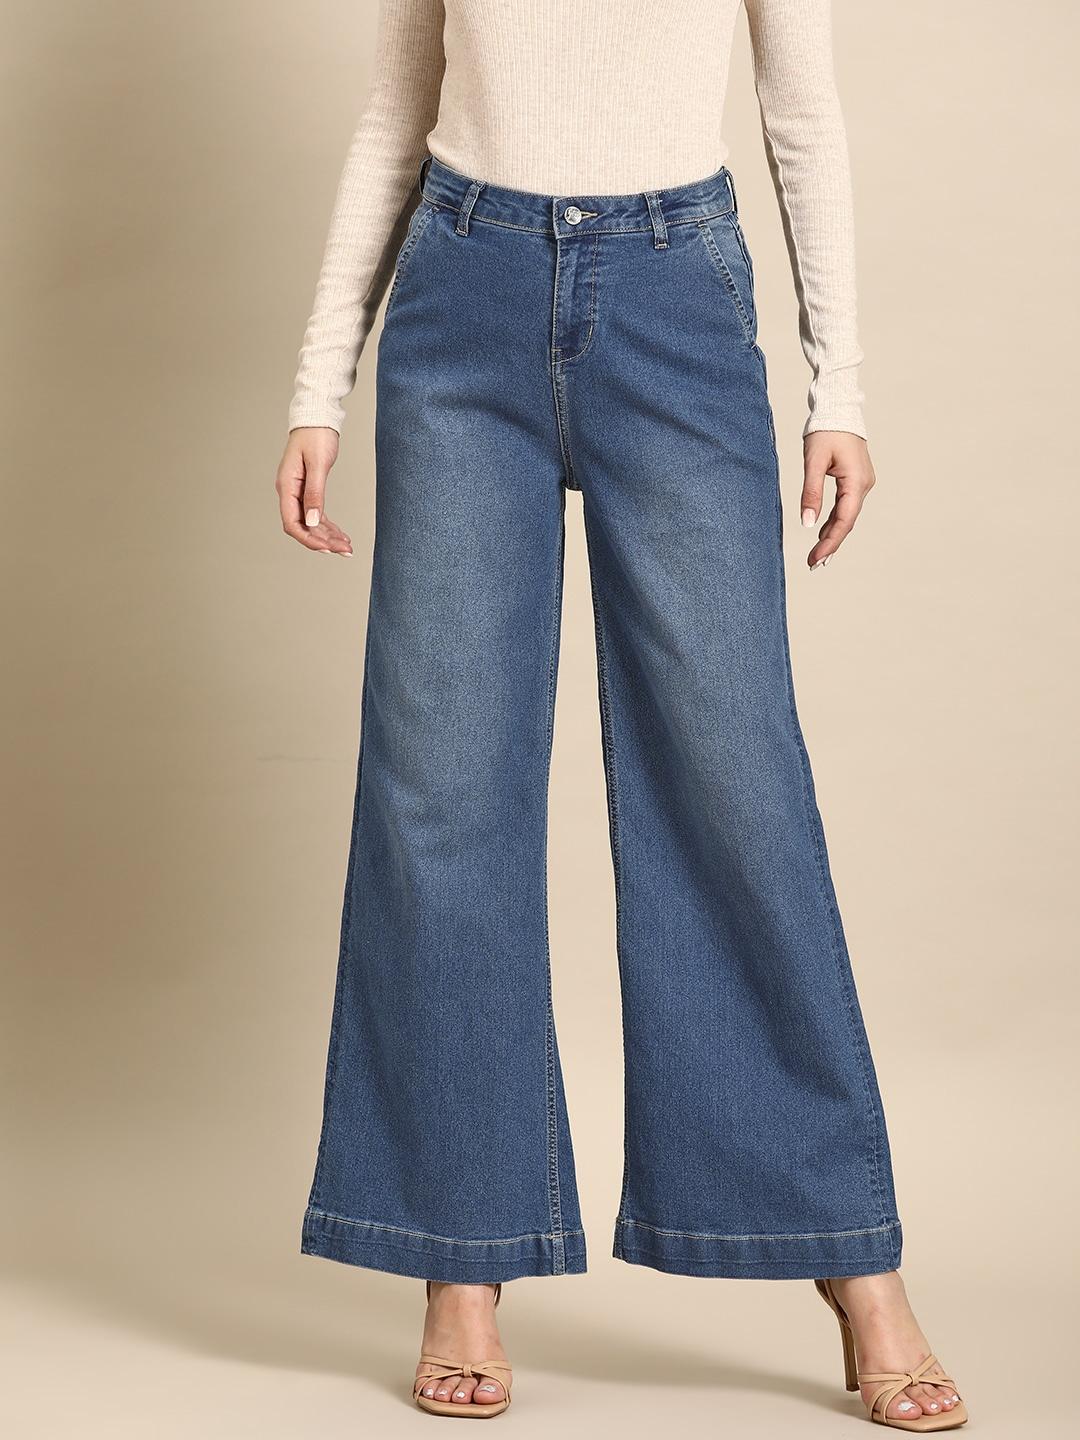 all-about-you-women-wide-leg-light-fade-stretchable-jeans